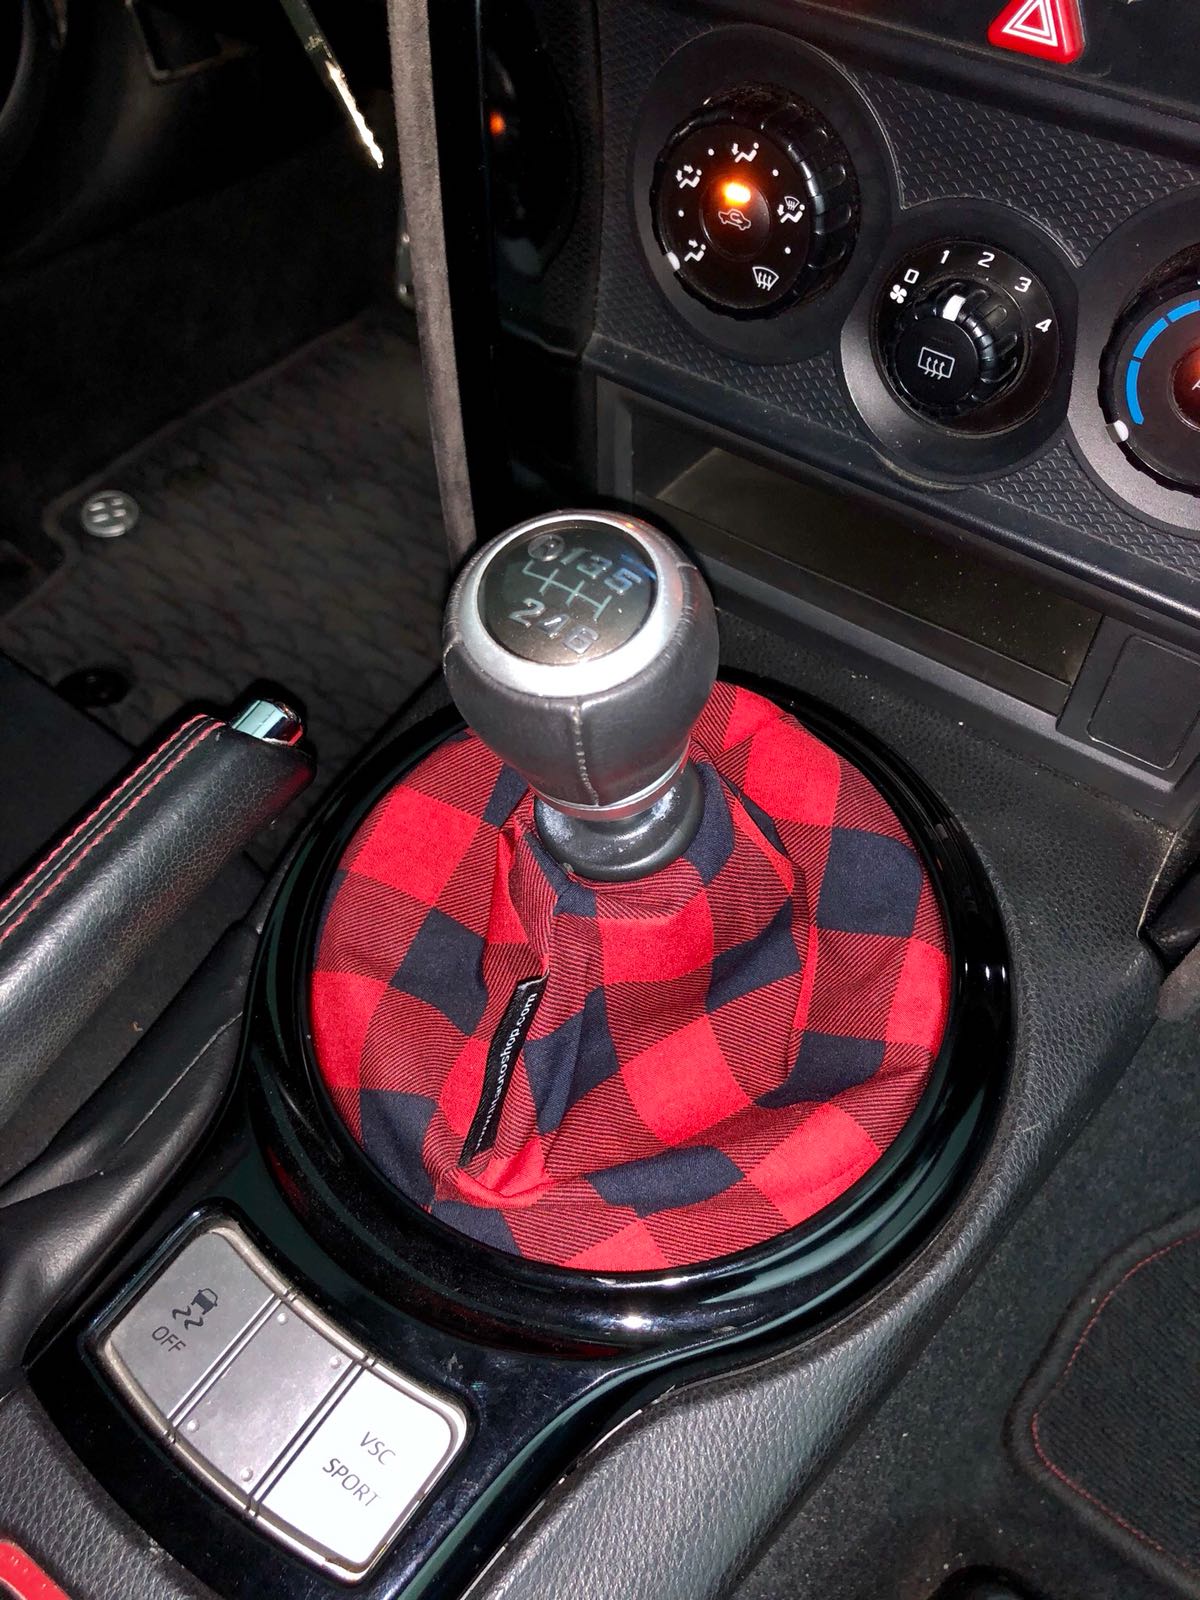 shift boot cover , shift boot cover for automatic , shift boot cover wrx , shift boot cover gt86 , shift boot with ebrake boot , gear shift boot cover , jdm shift boot cover